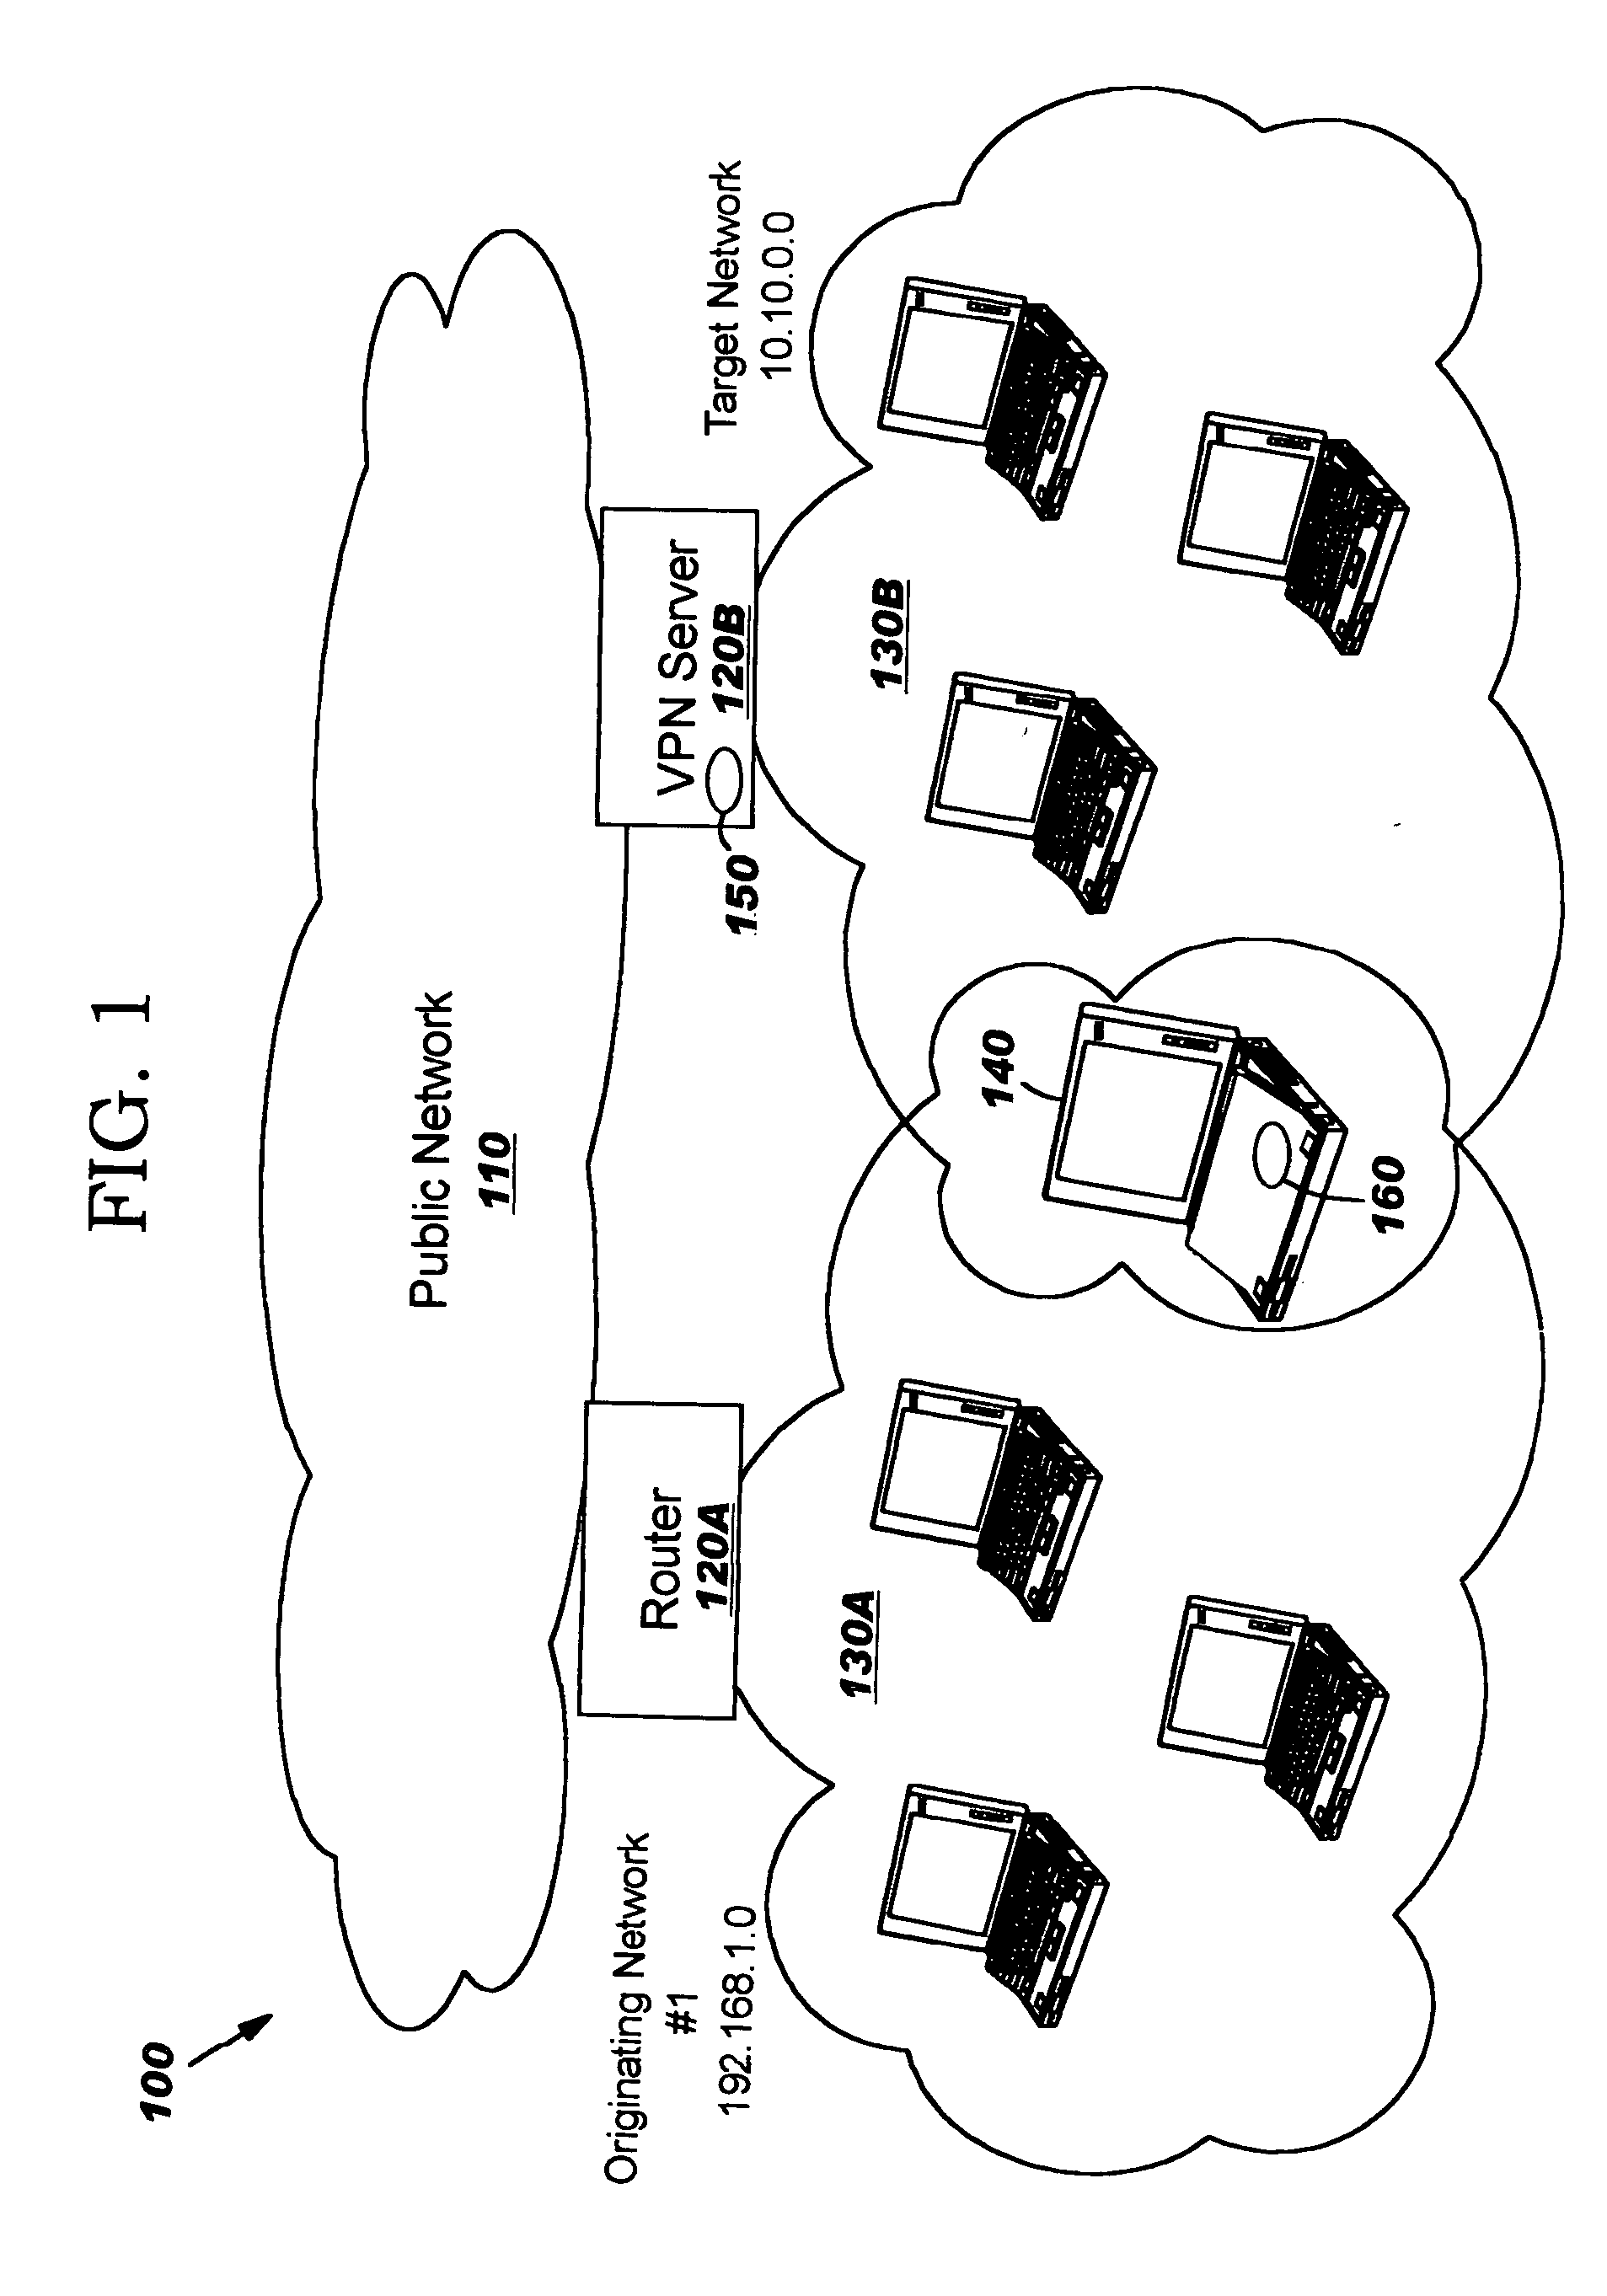 Systems, Methods, and Computer Readable Medium for Avoiding a Network Address Collision